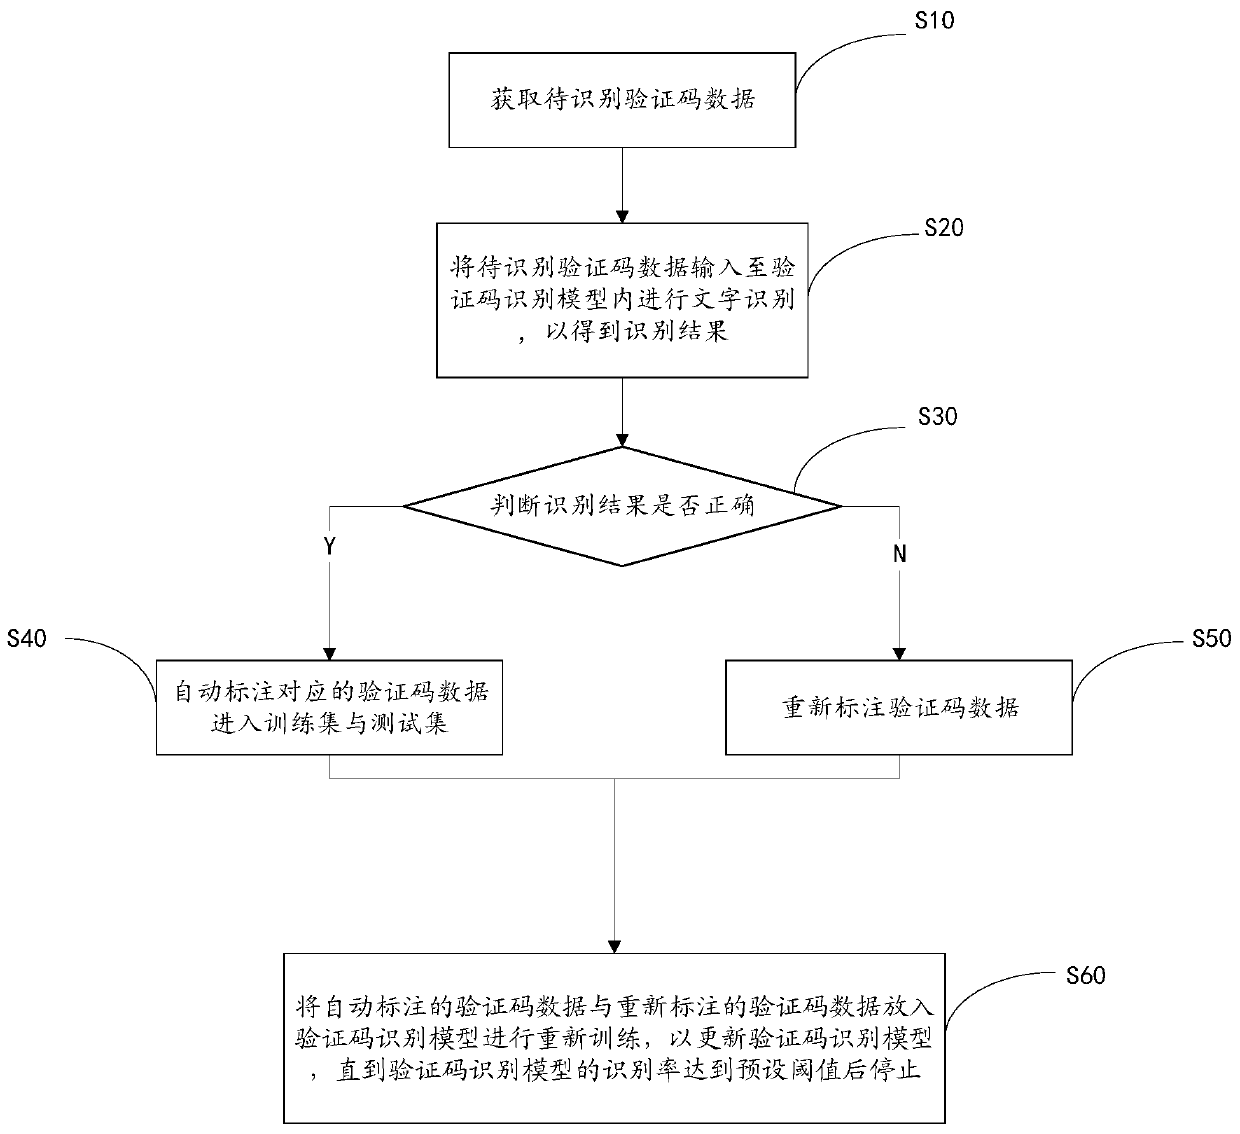 Network verification code recognition method and device based on deep learning and computer equipment